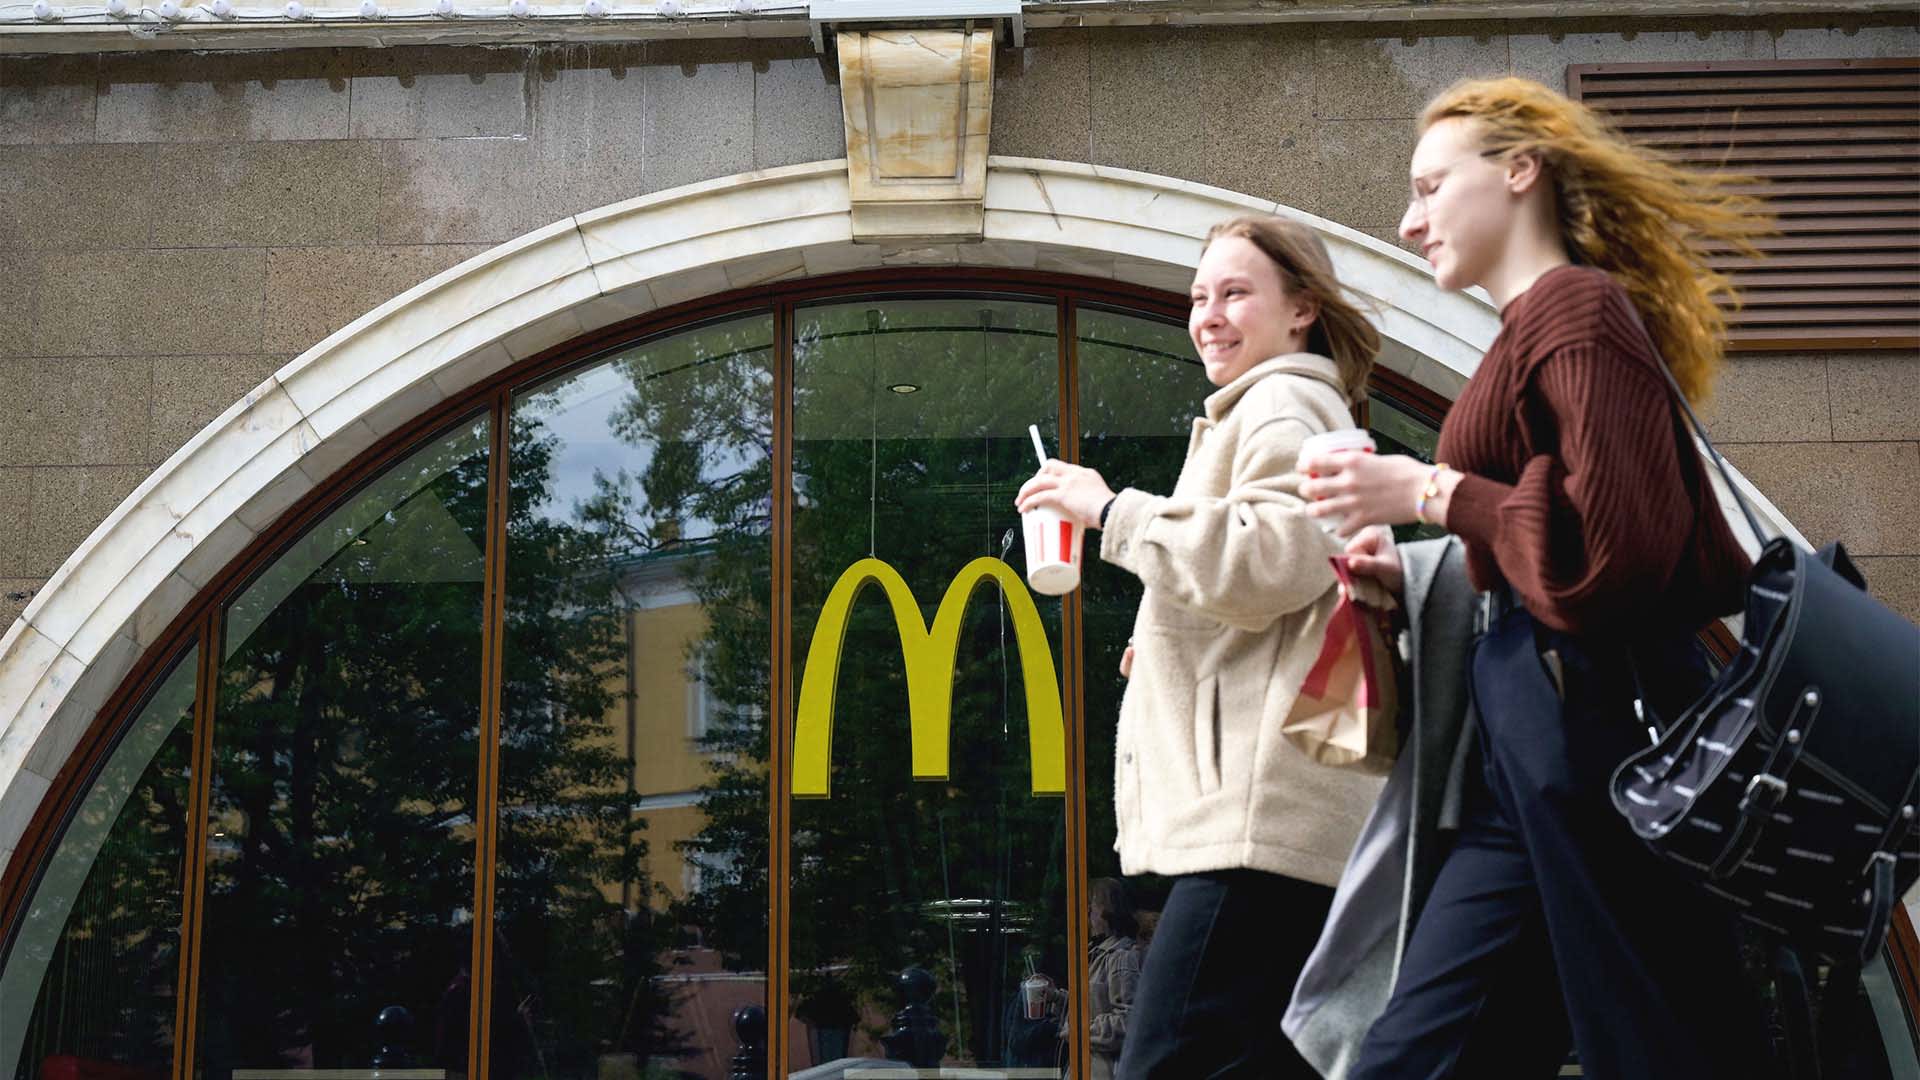 A closed McDonald's restaurant in Moscow.